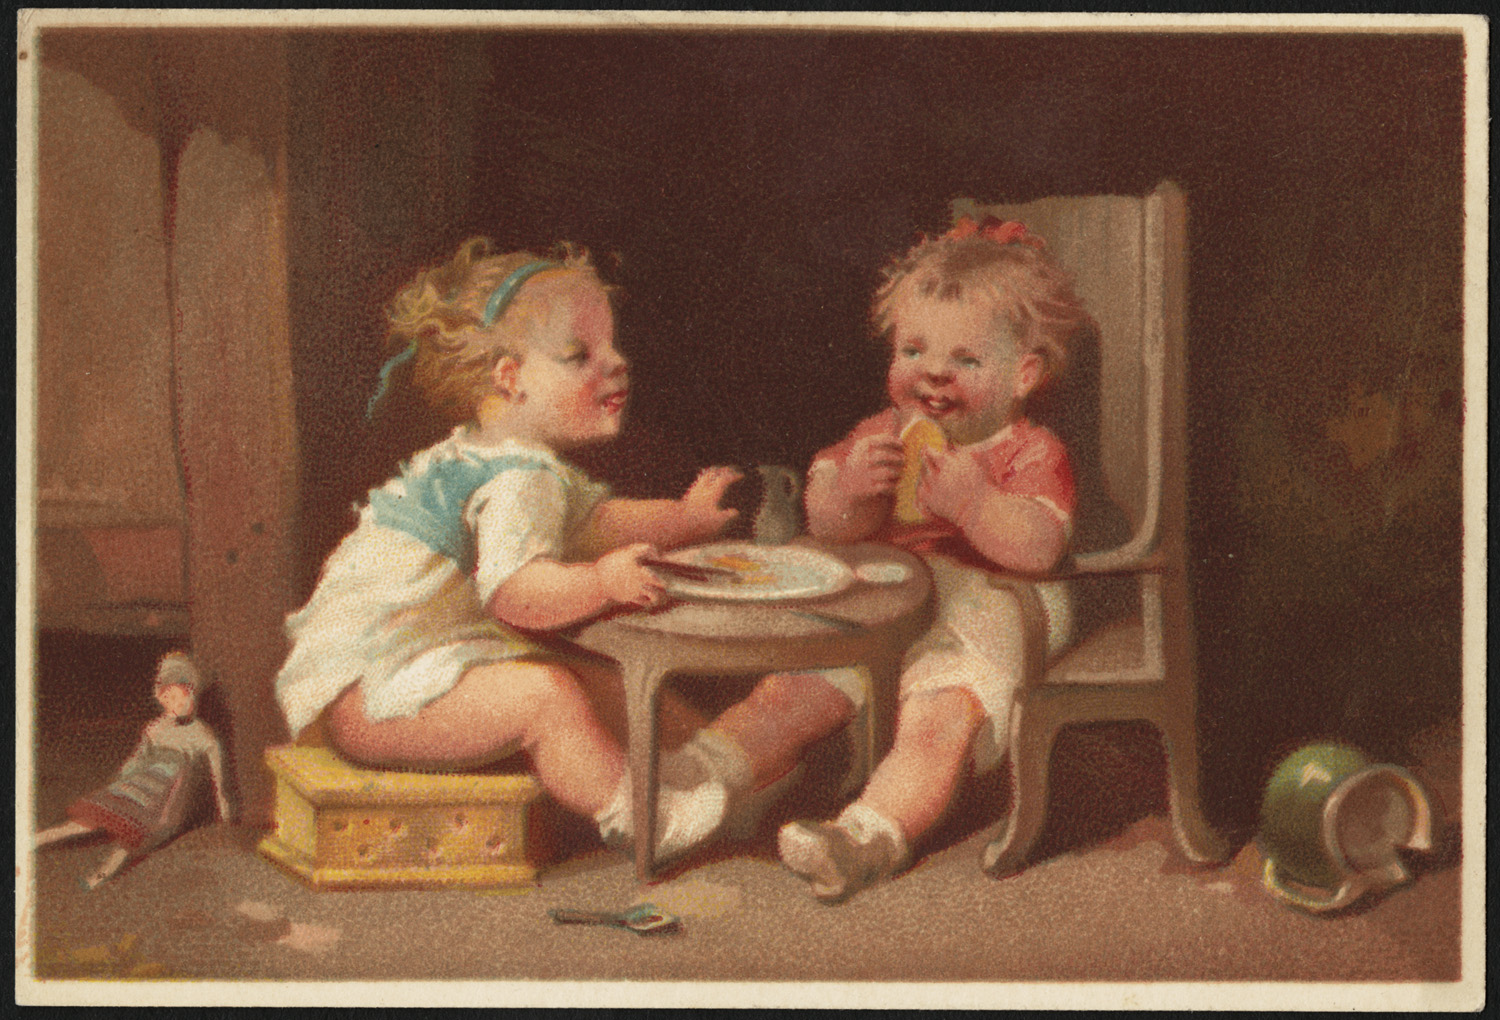 two children sitting at a table sharing a meal